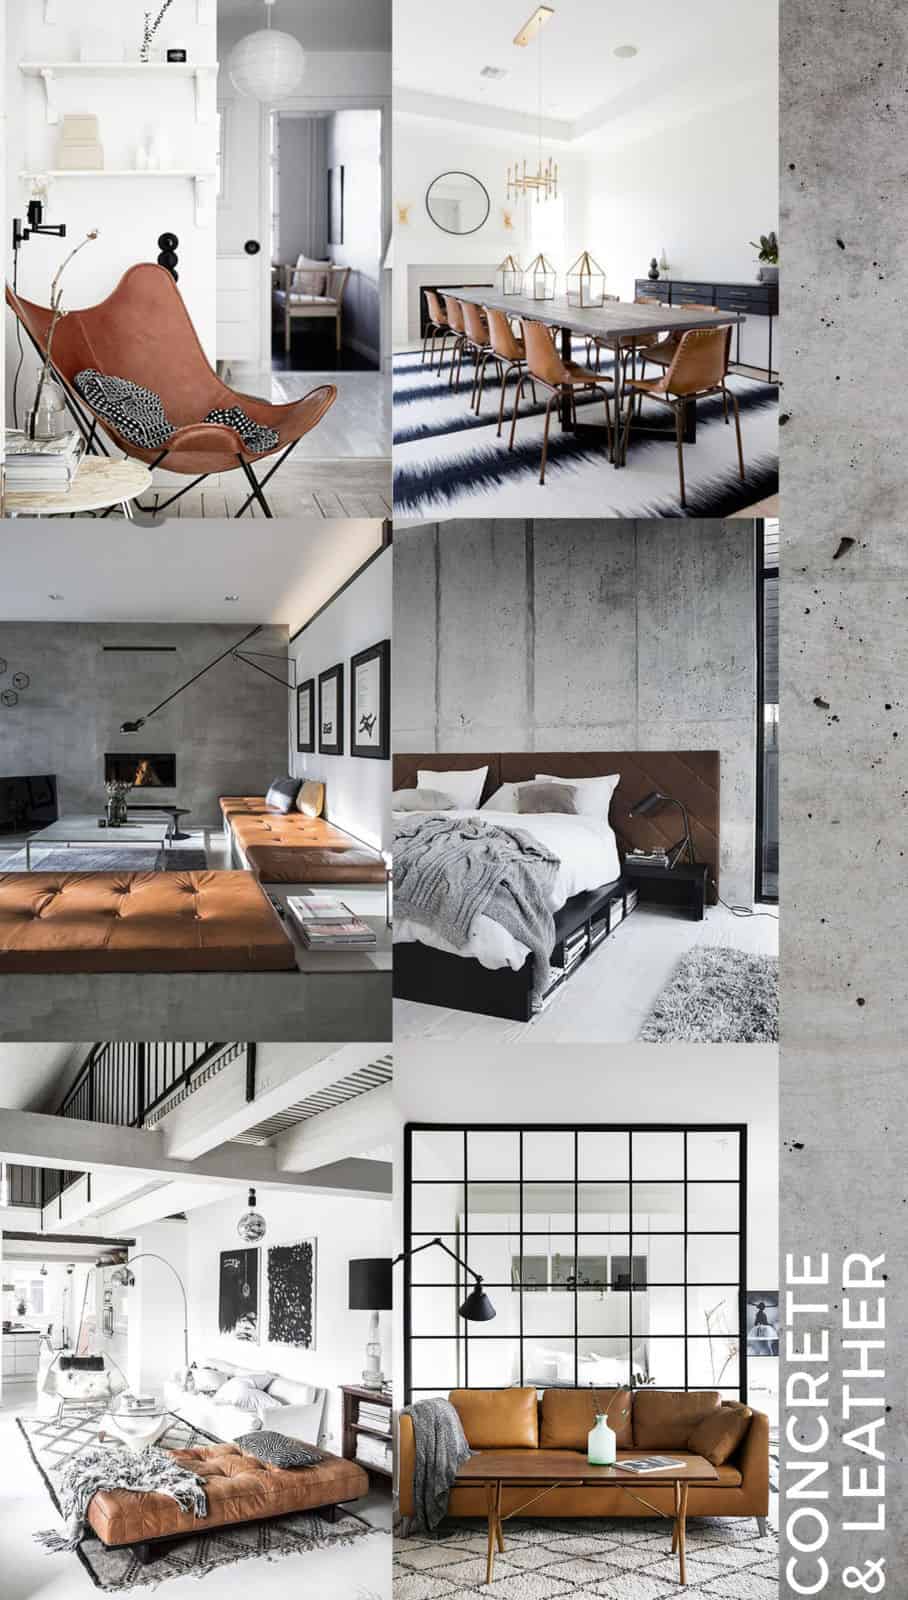 concrete and leather - industrial style - interior trend